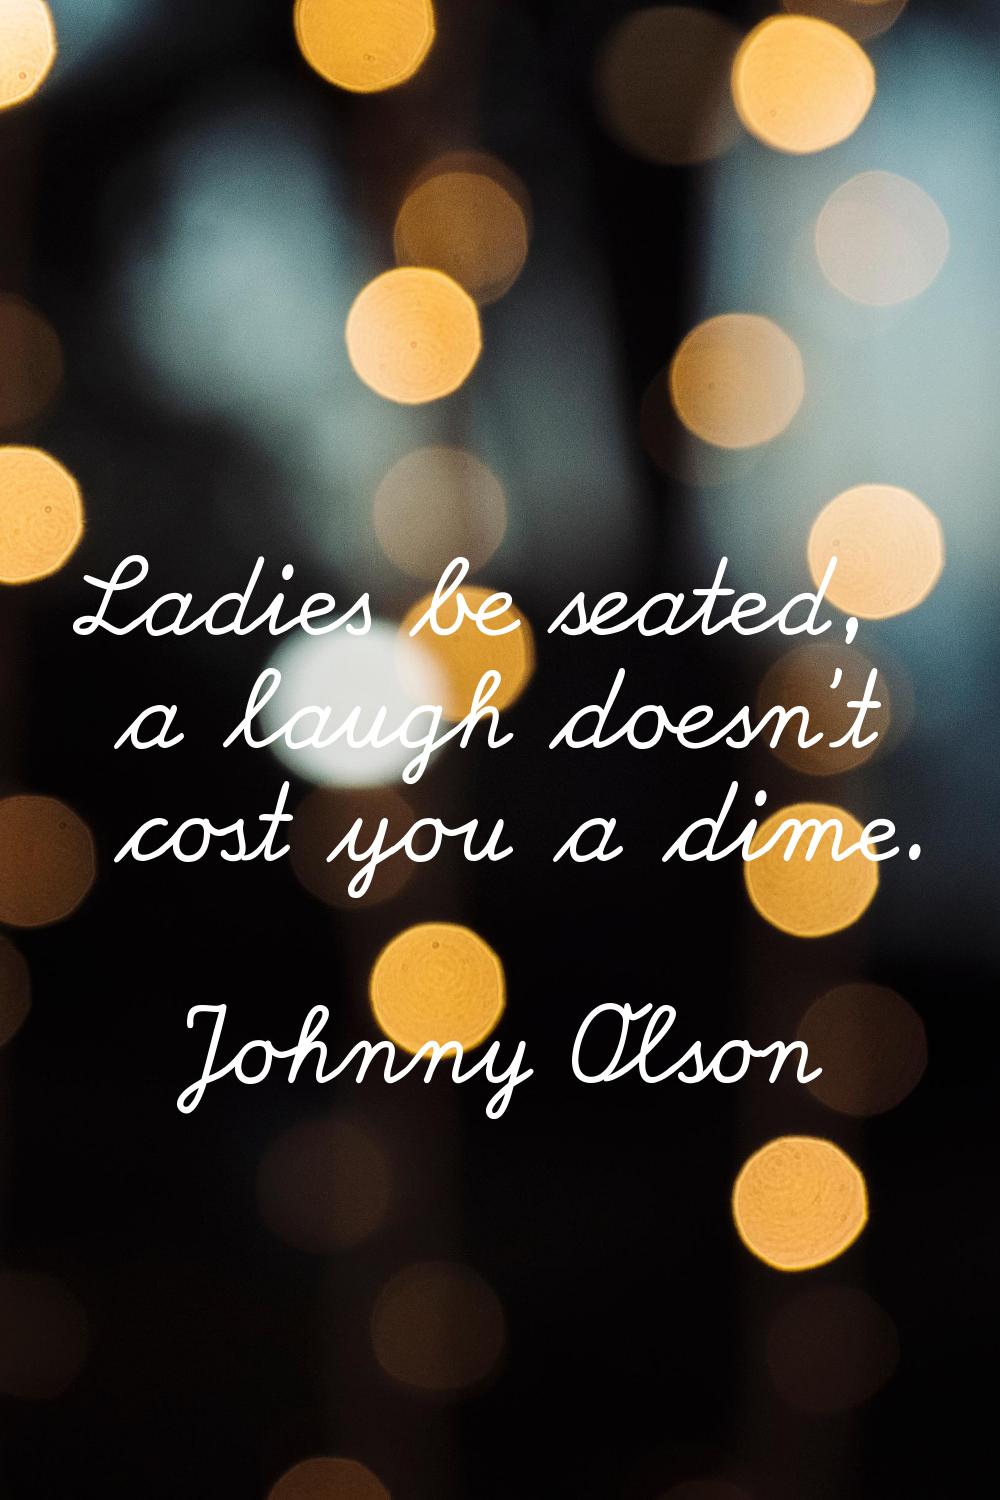 Ladies be seated, a laugh doesn't cost you a dime.